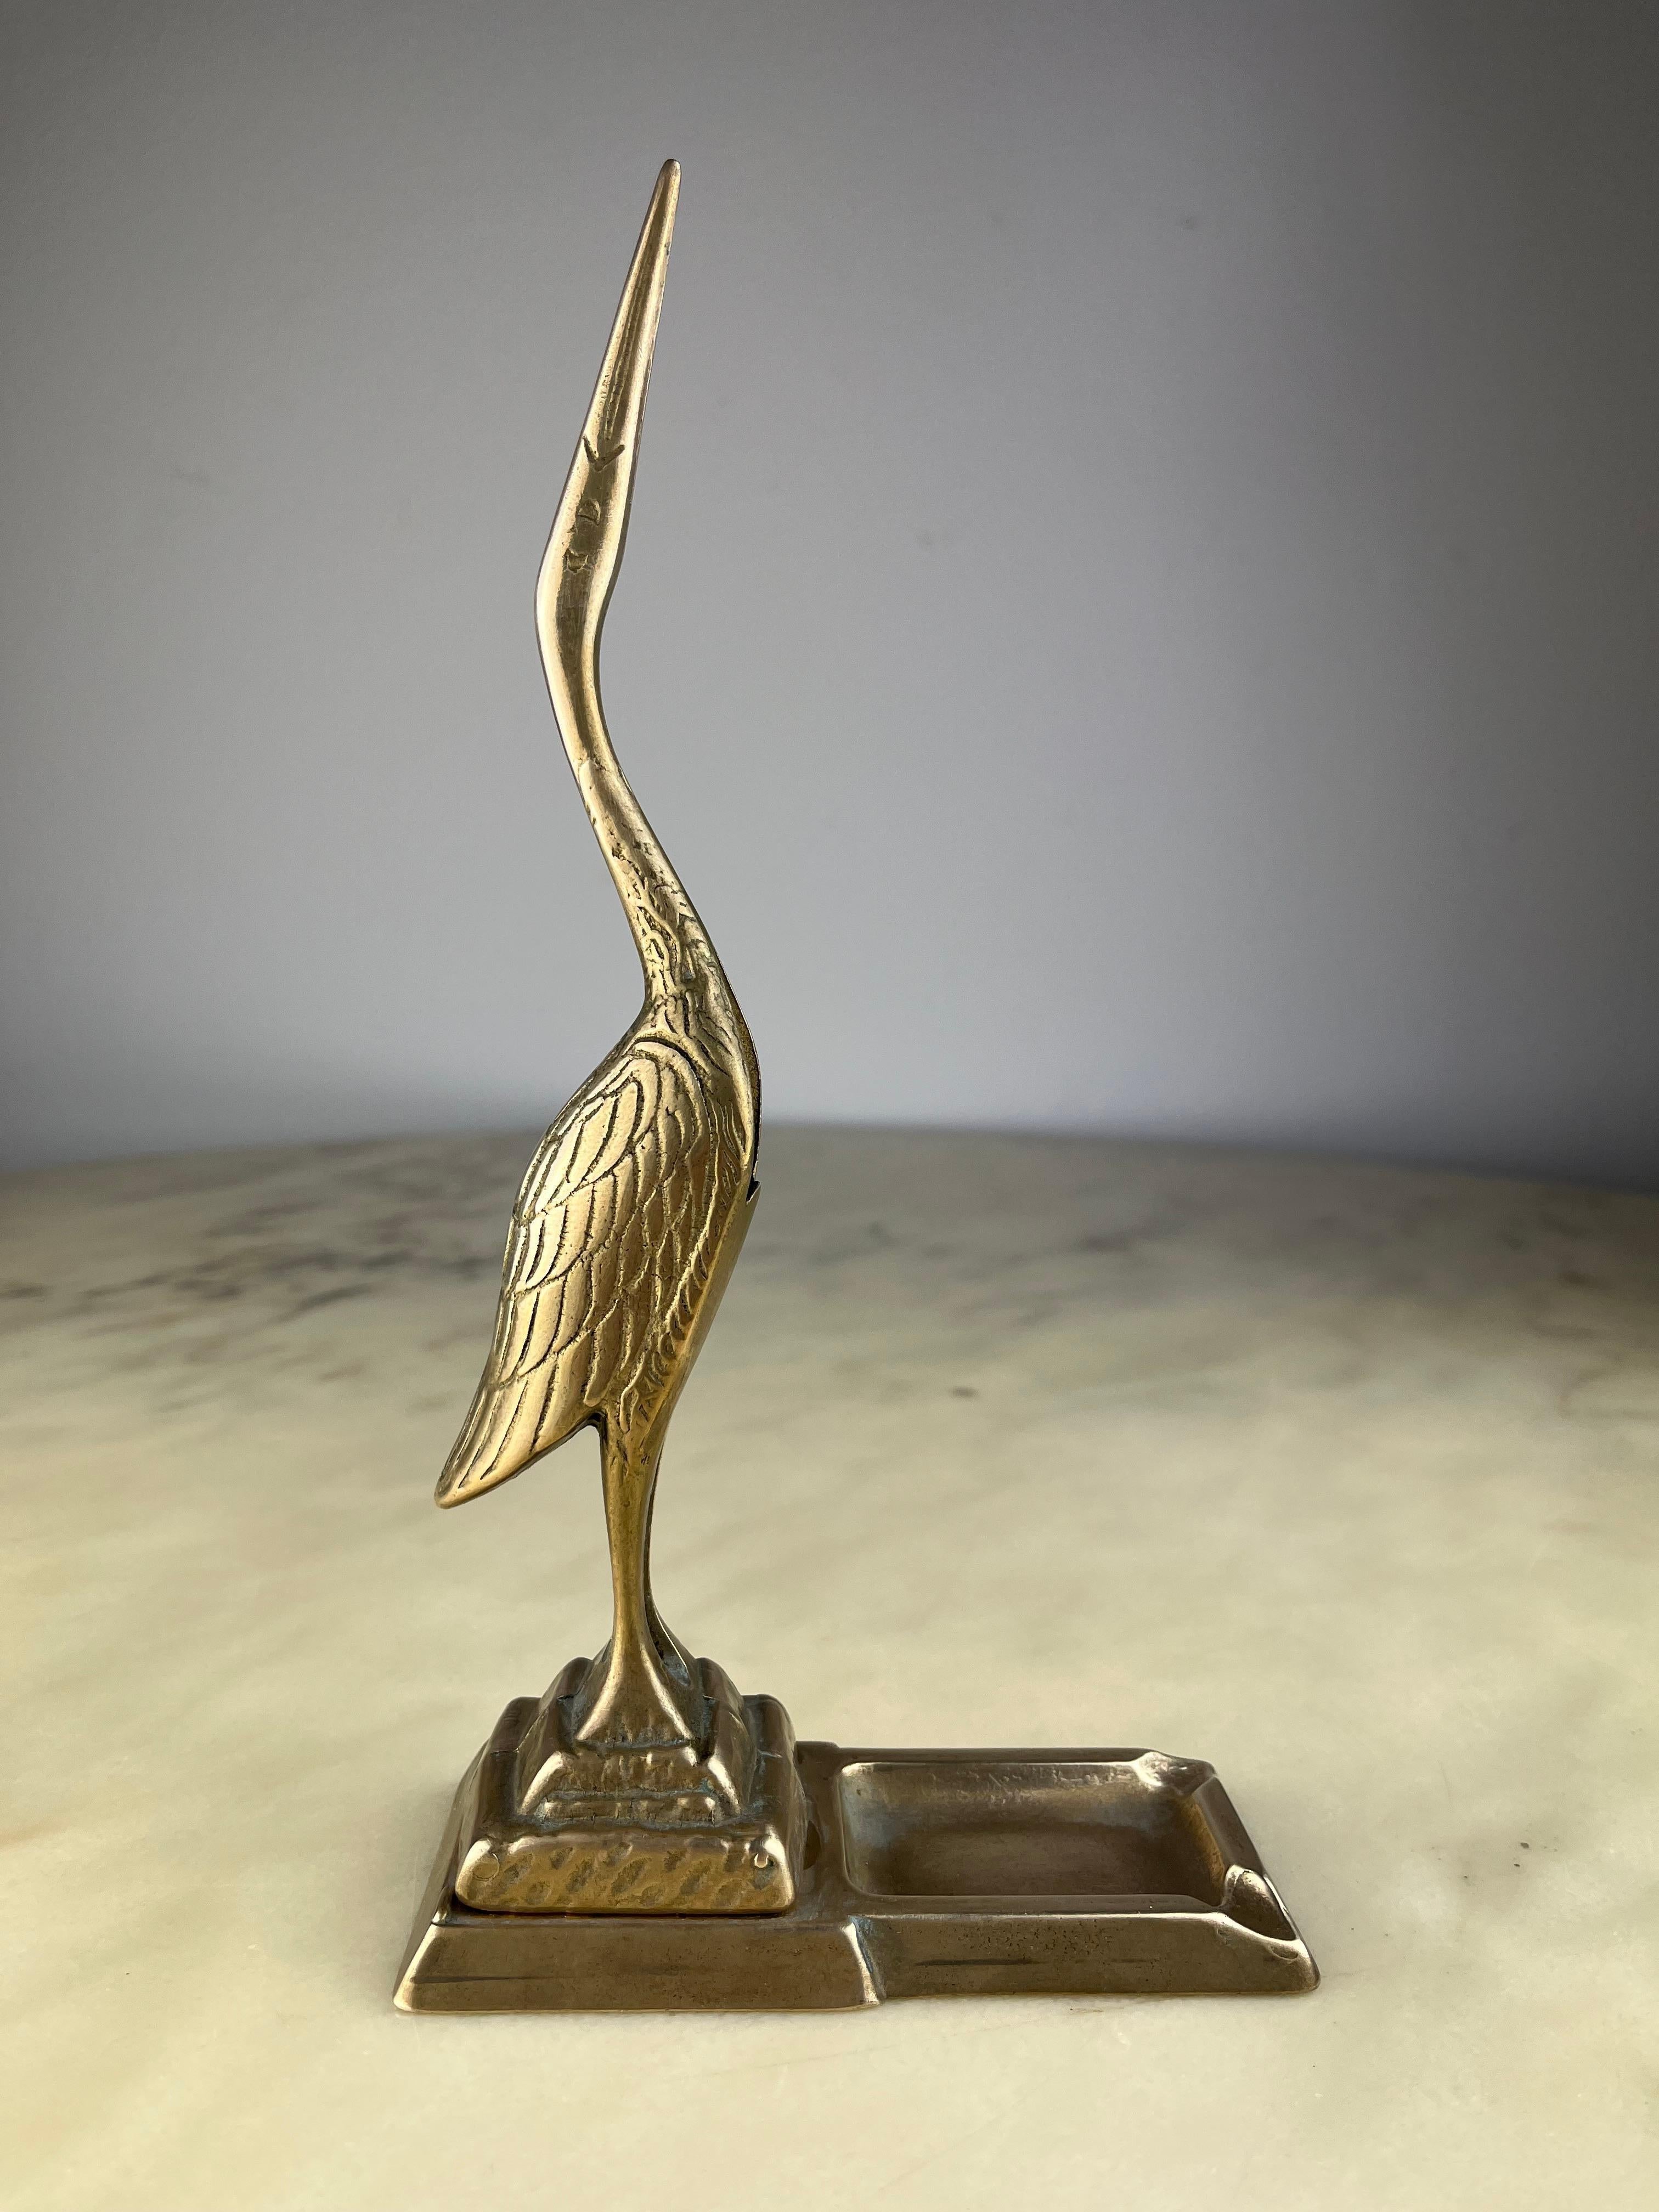 Mid-Century Flamingo Brass ashtray, made in  Italy, 1960s
Small signs of time and use.
Object of great charm.

We guarantee adequate packaging and will ship via DHL, insuring the contents against any breakage or loss of the package.